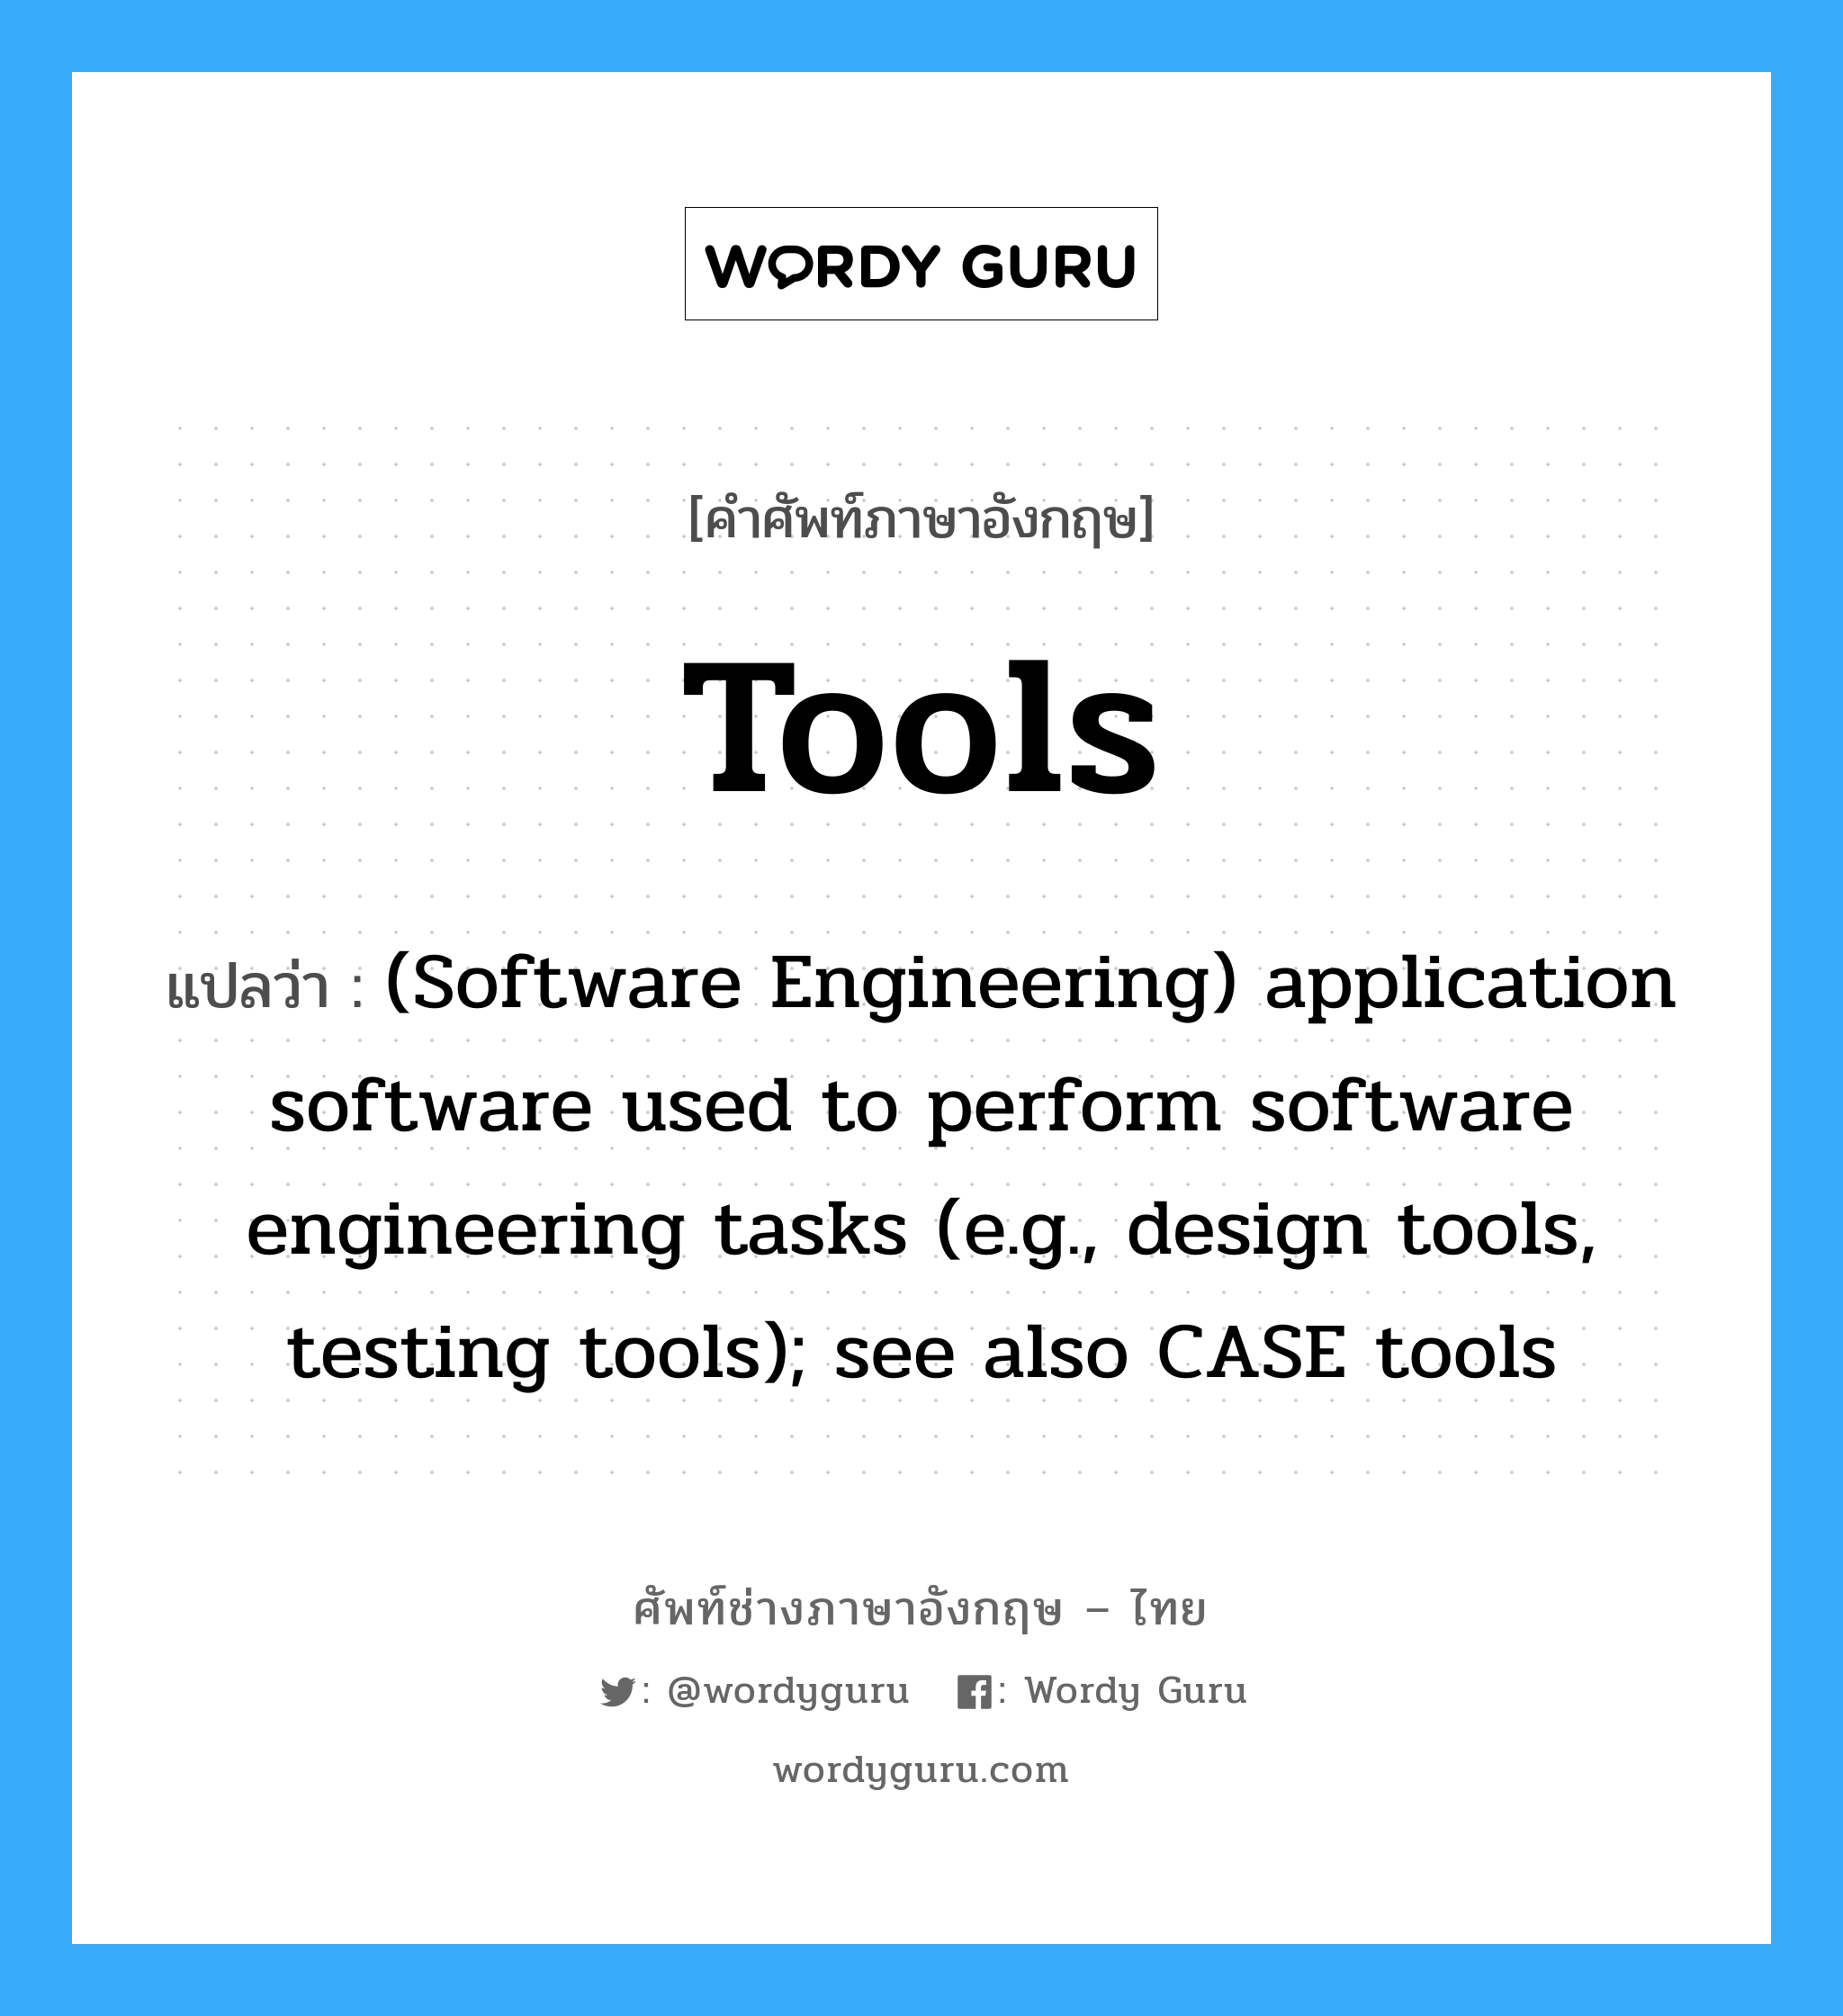 Tools แปลว่า?, คำศัพท์ช่างภาษาอังกฤษ - ไทย Tools คำศัพท์ภาษาอังกฤษ Tools แปลว่า (Software Engineering) application software used to perform software engineering tasks (e.g., design tools, testing tools); see also CASE tools